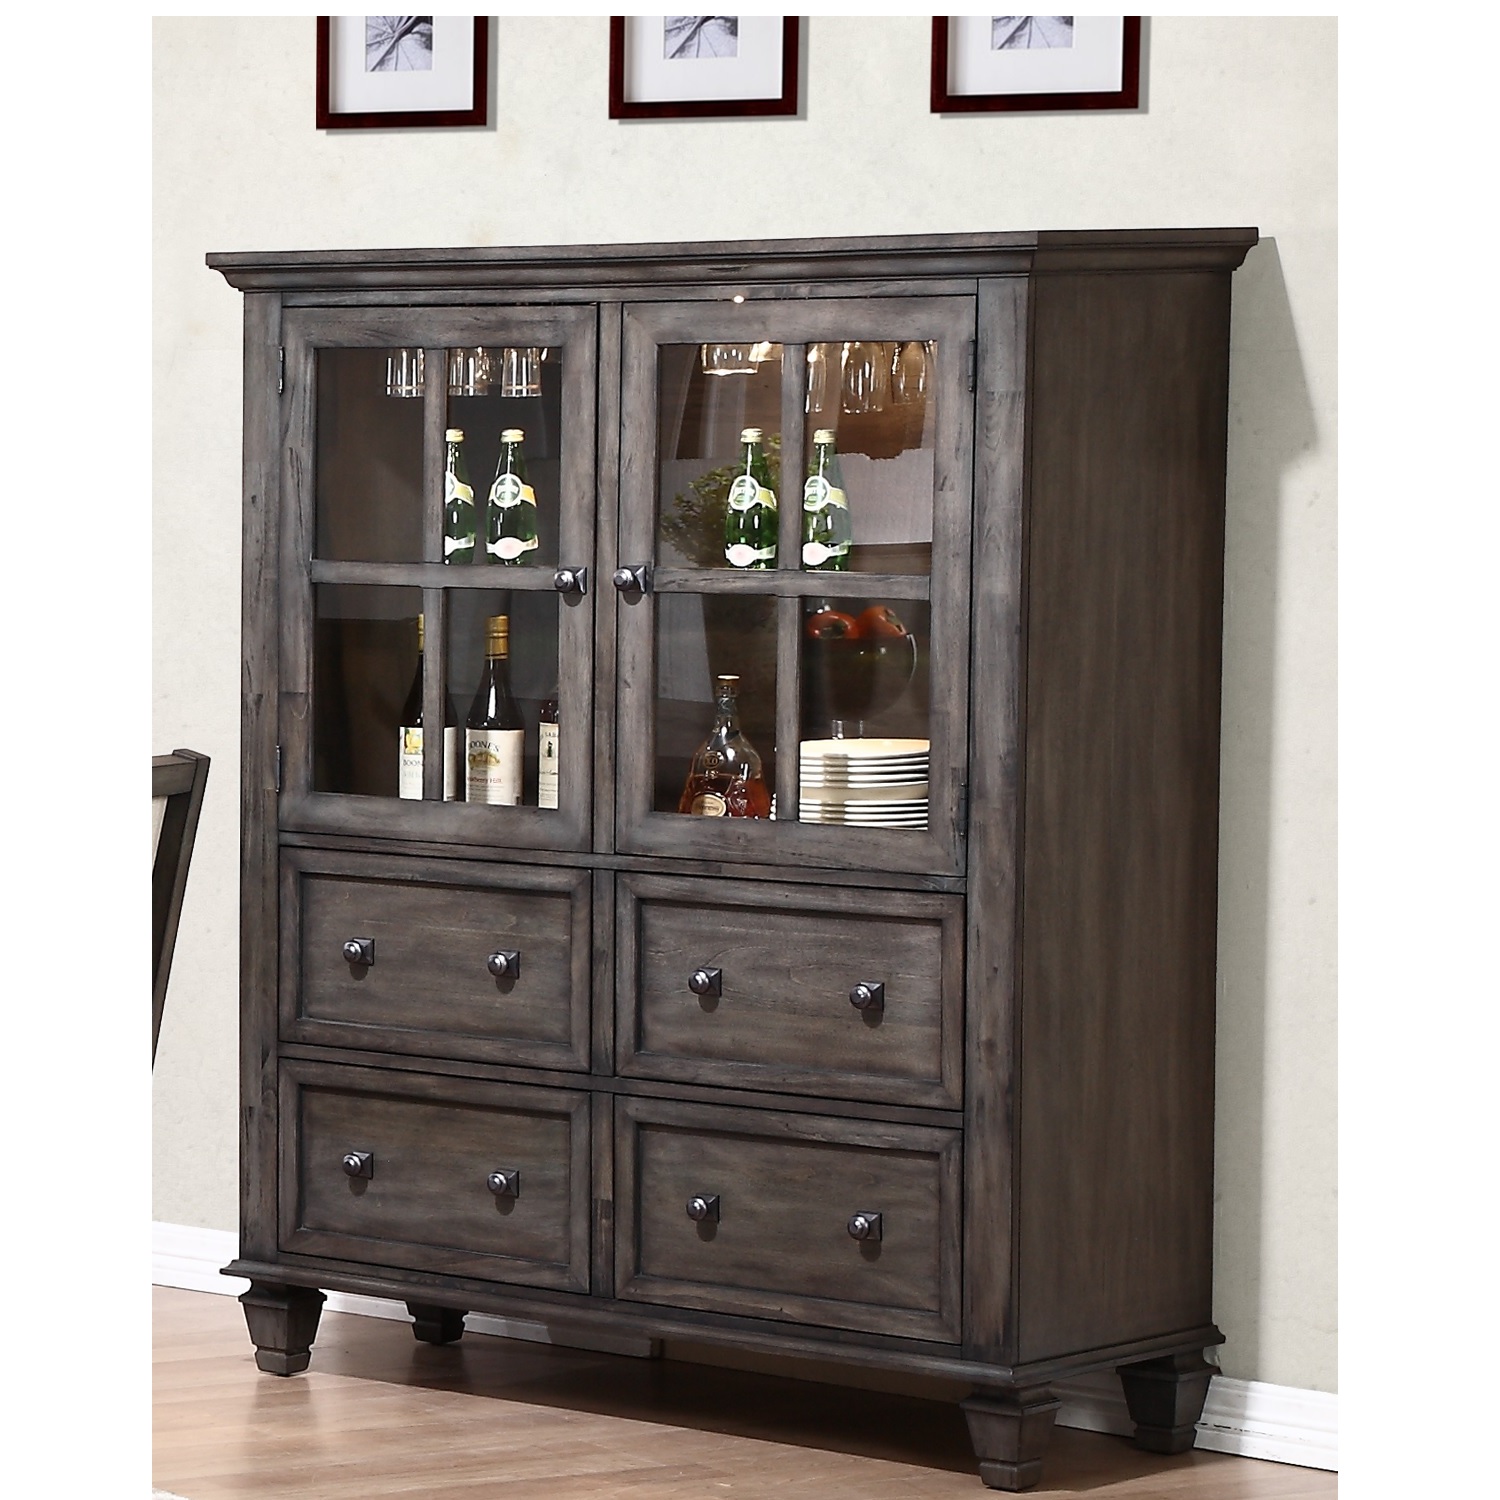 The Hamptons Collection 62” Handcrafted Shades of Gray One Piece China Cabinet with Solid Metal Pewter Square Knobs